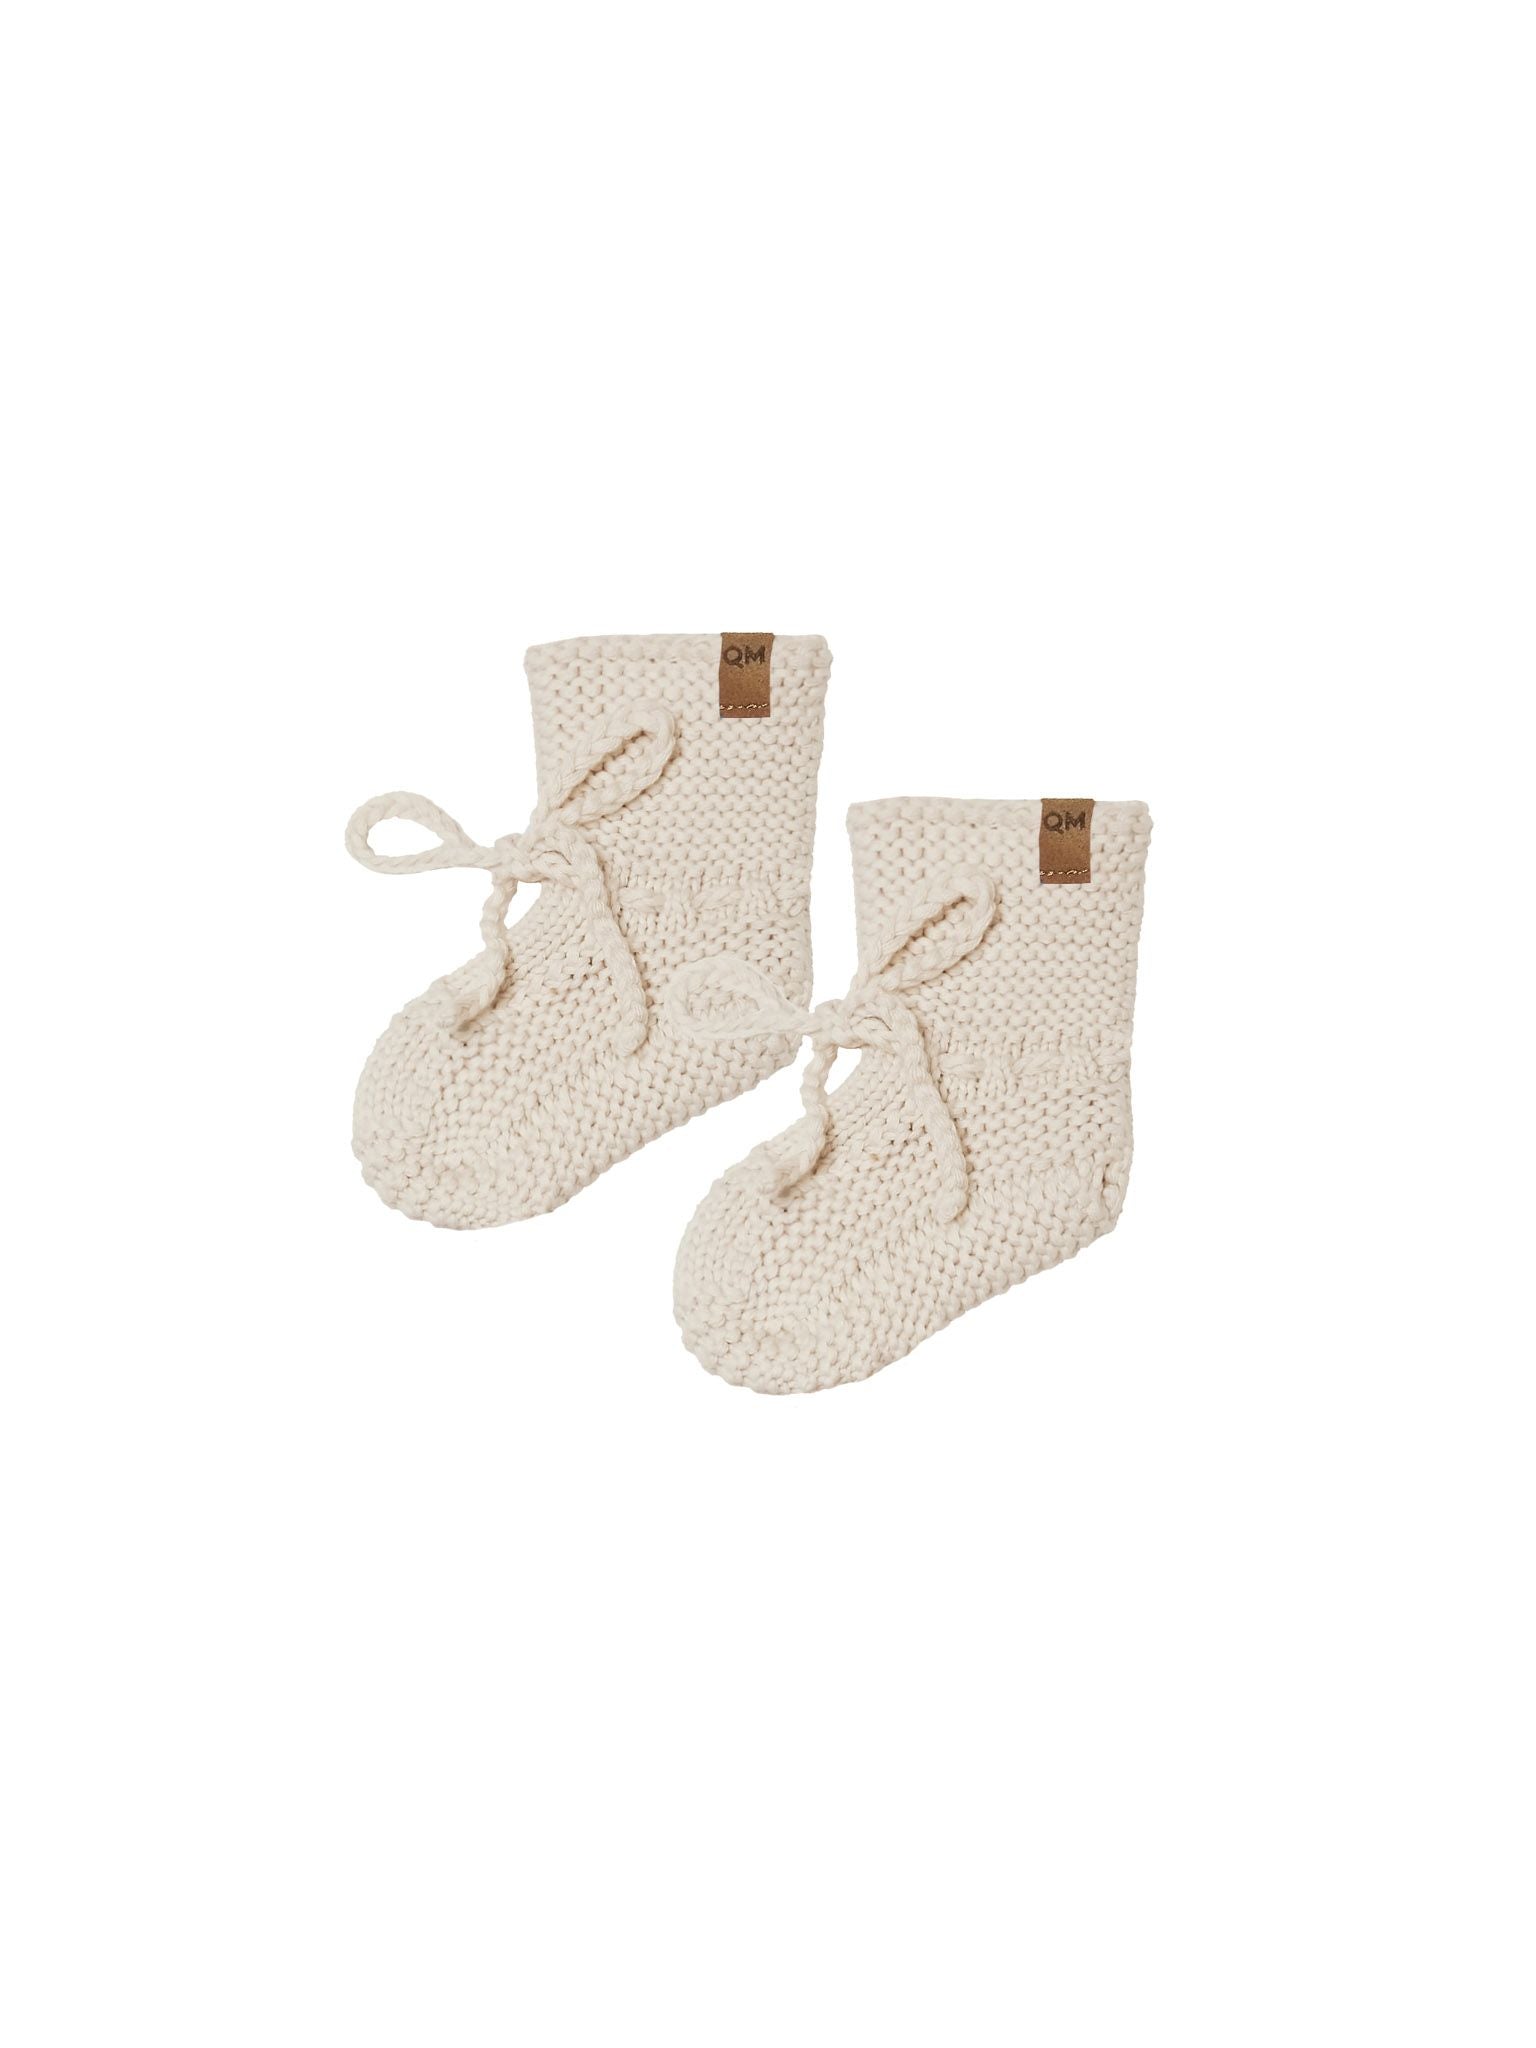 Quincy Mae natural knit booties against white backdrop